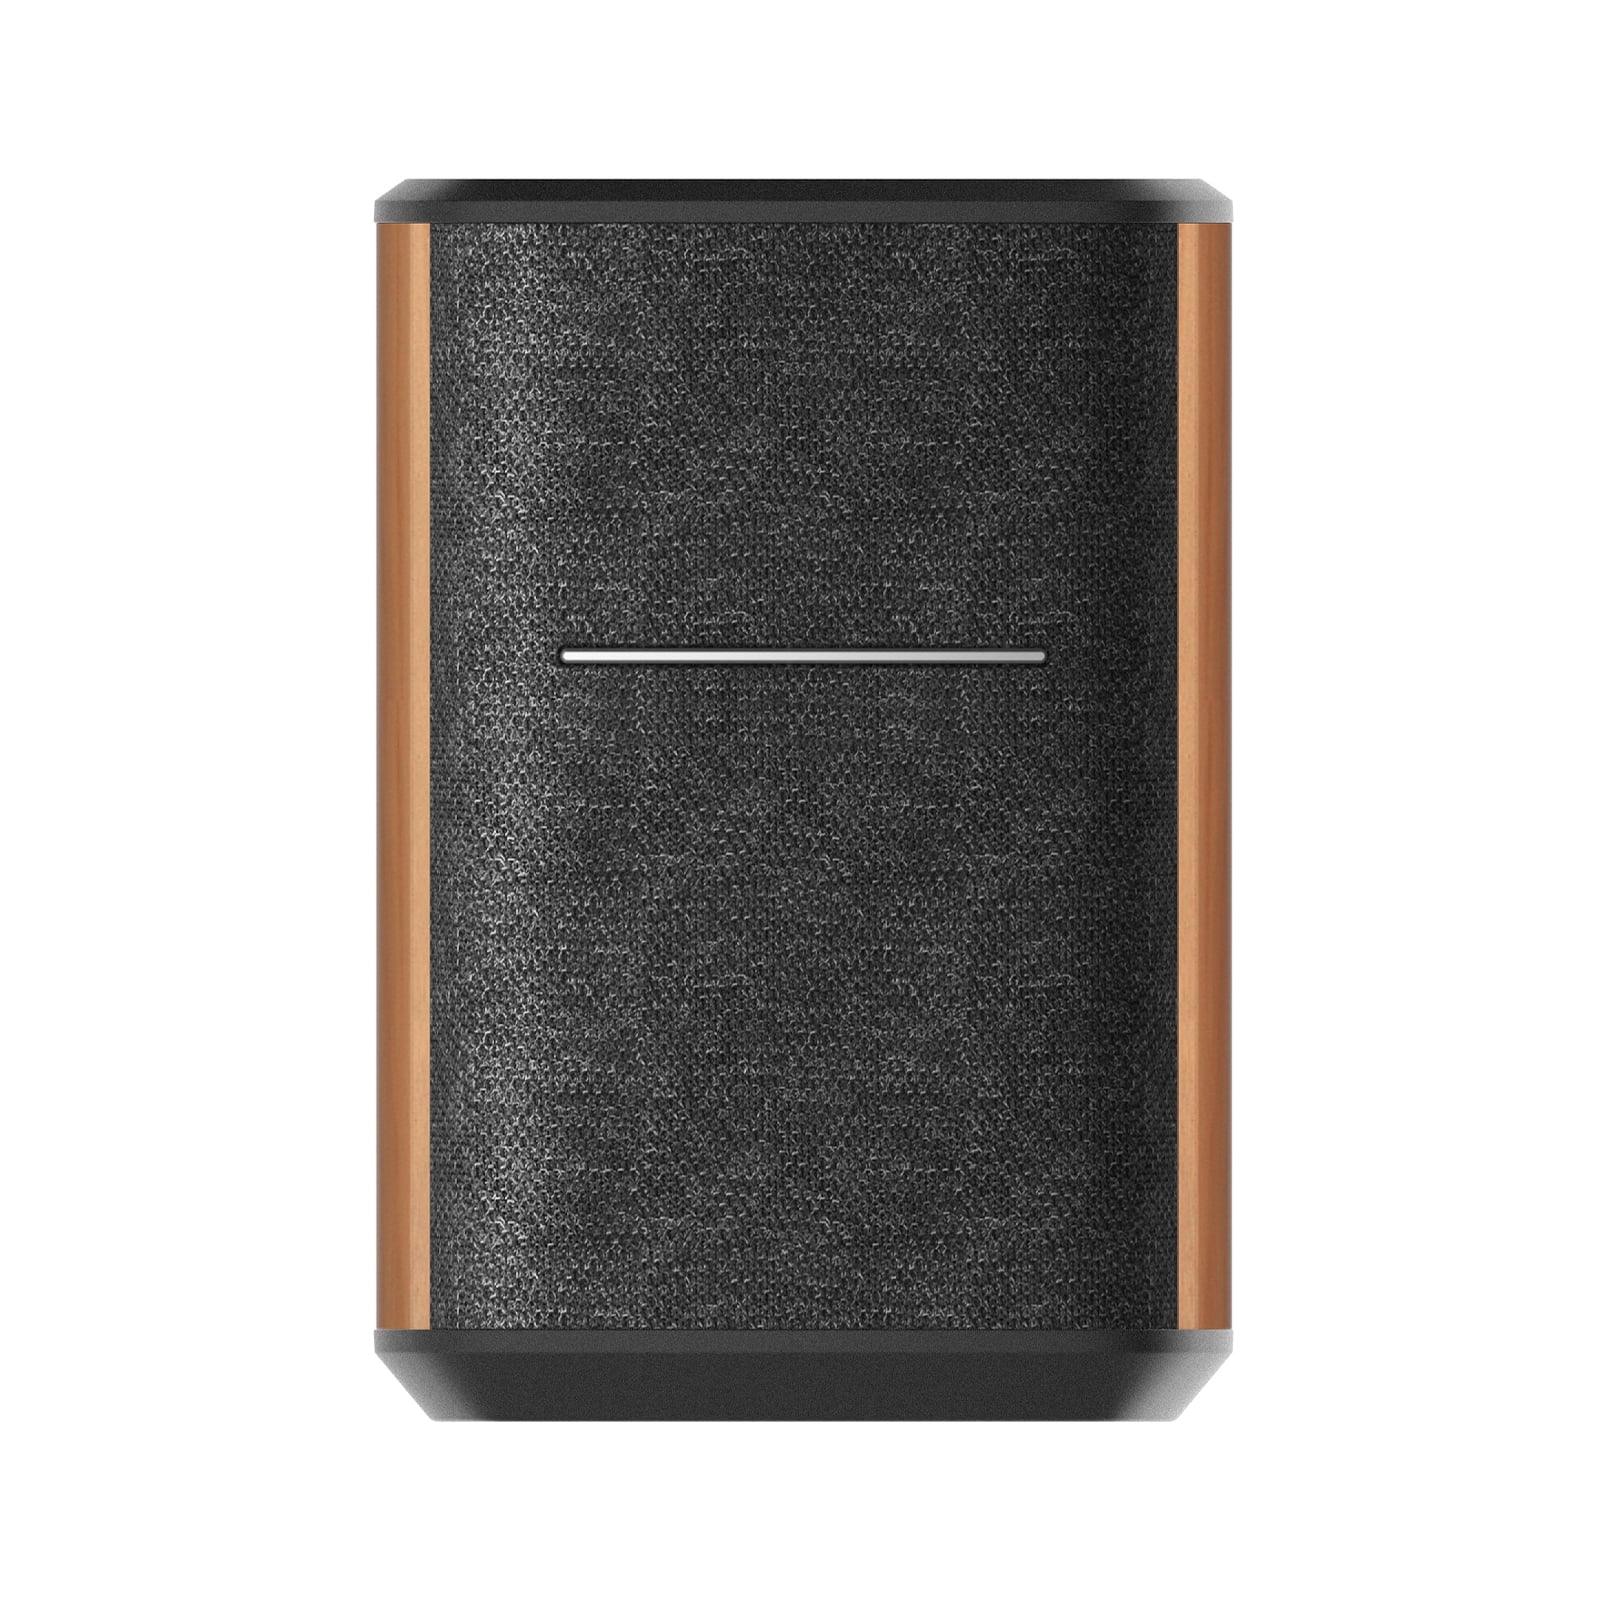 Edifier Wifi Smart Speaker without Microphone, works with Alexa, supports  AirPlay 2, Spotify, 40W RMS One-Piece Wi-Fi and Bluetooth Sound System, No  